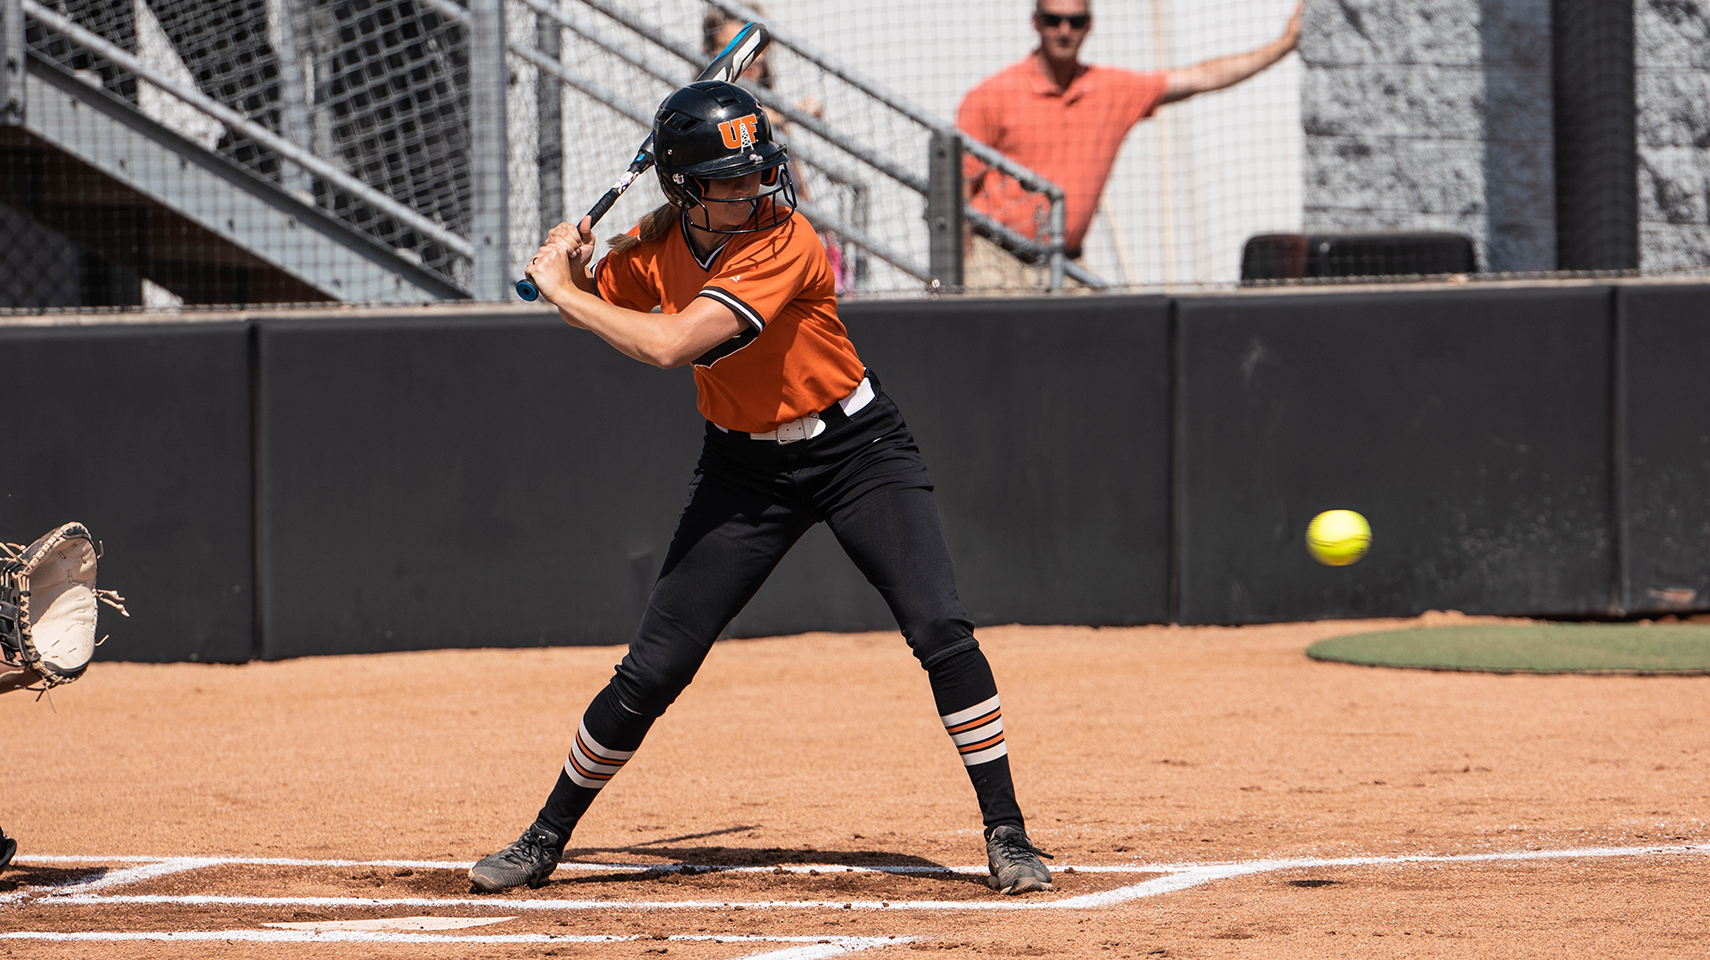 softball player in orange uniform taking a pitch at the plate